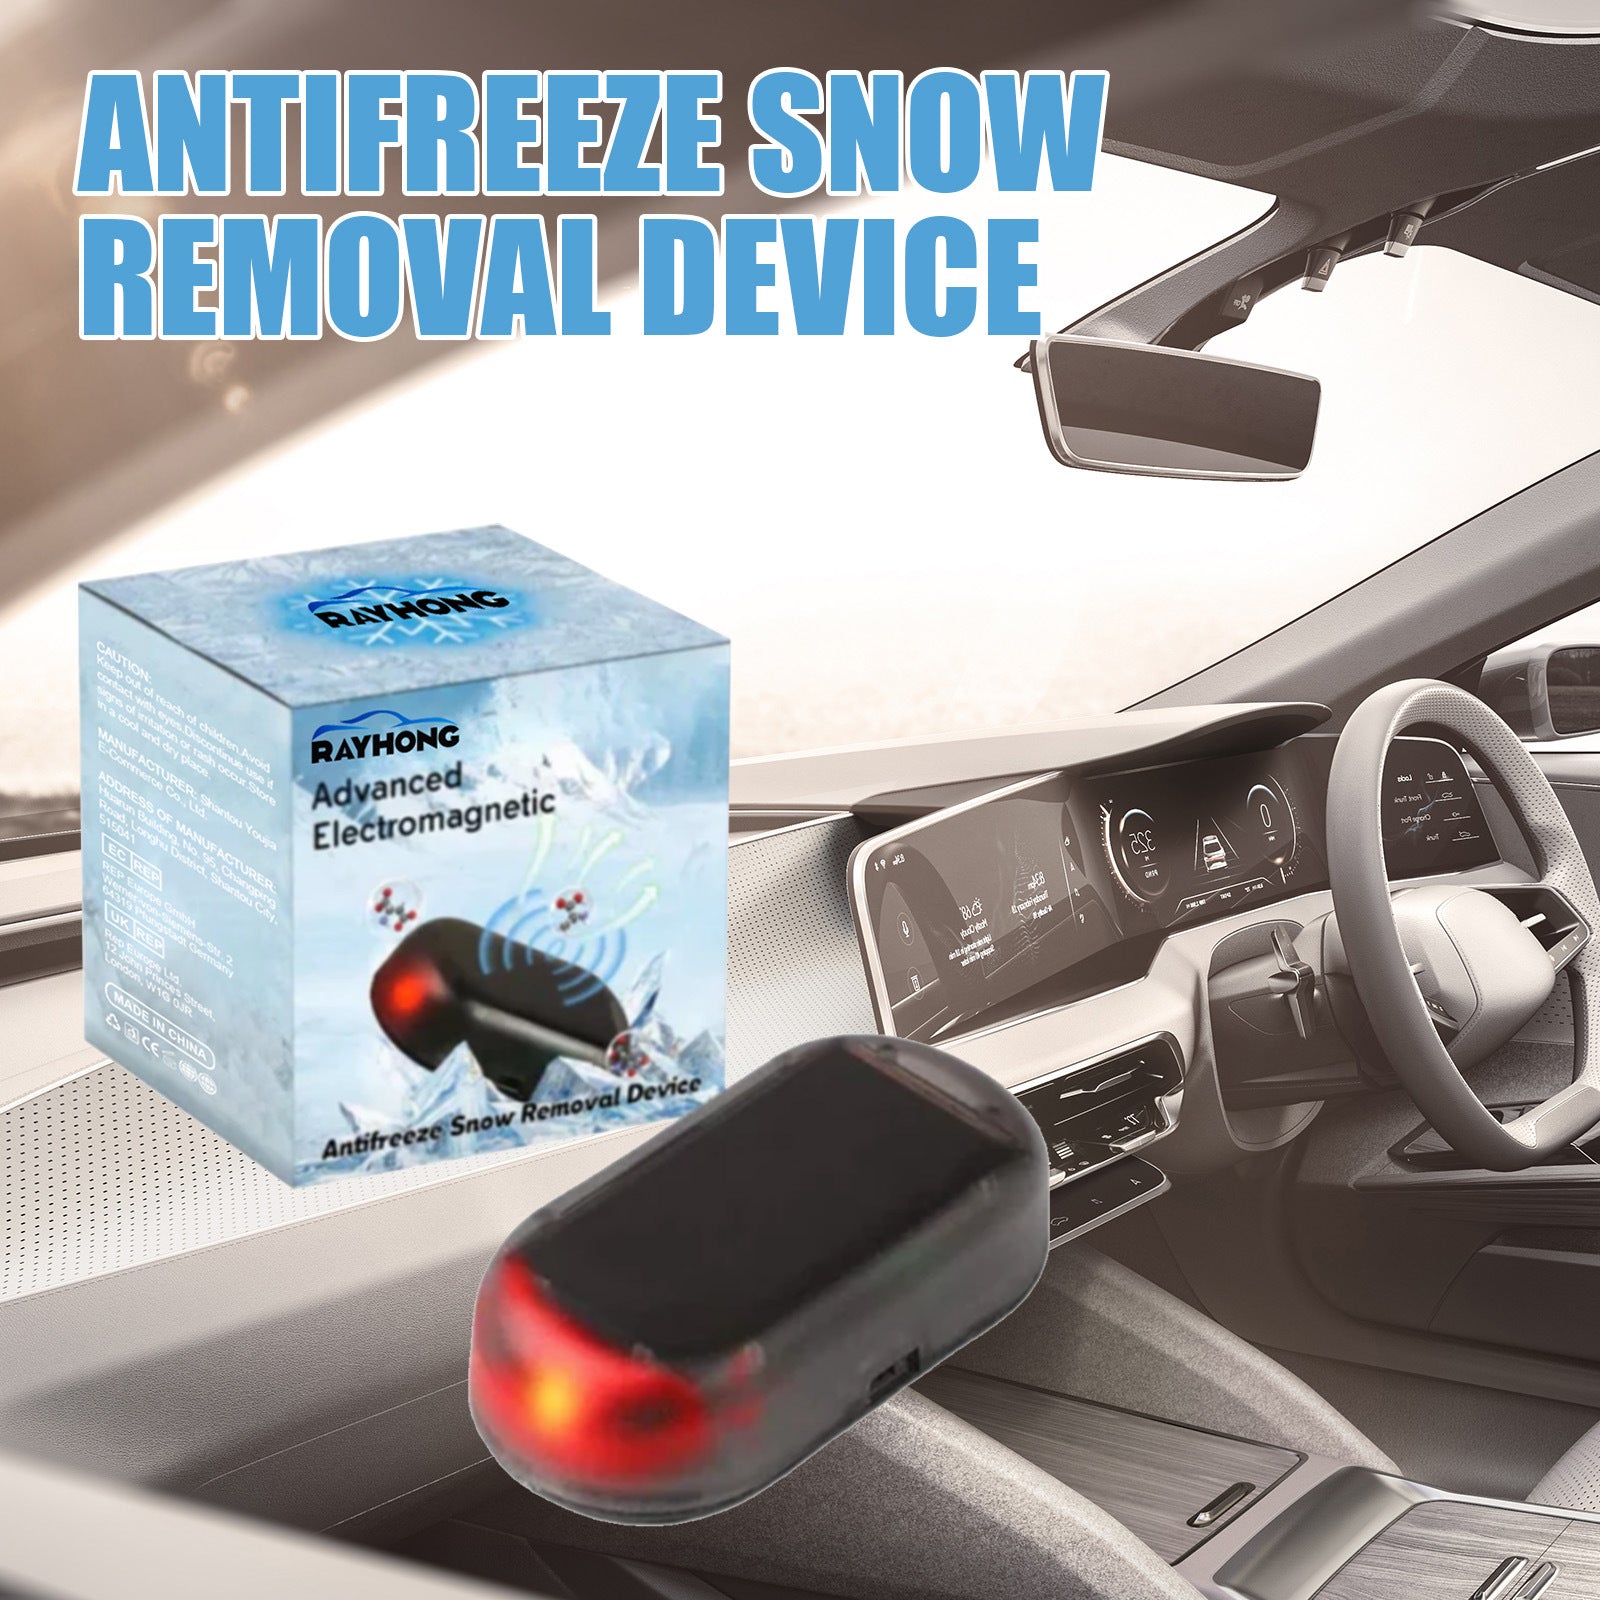 Advanced Electromagnetic Antifreeze Snow Removal Device – Best Buy